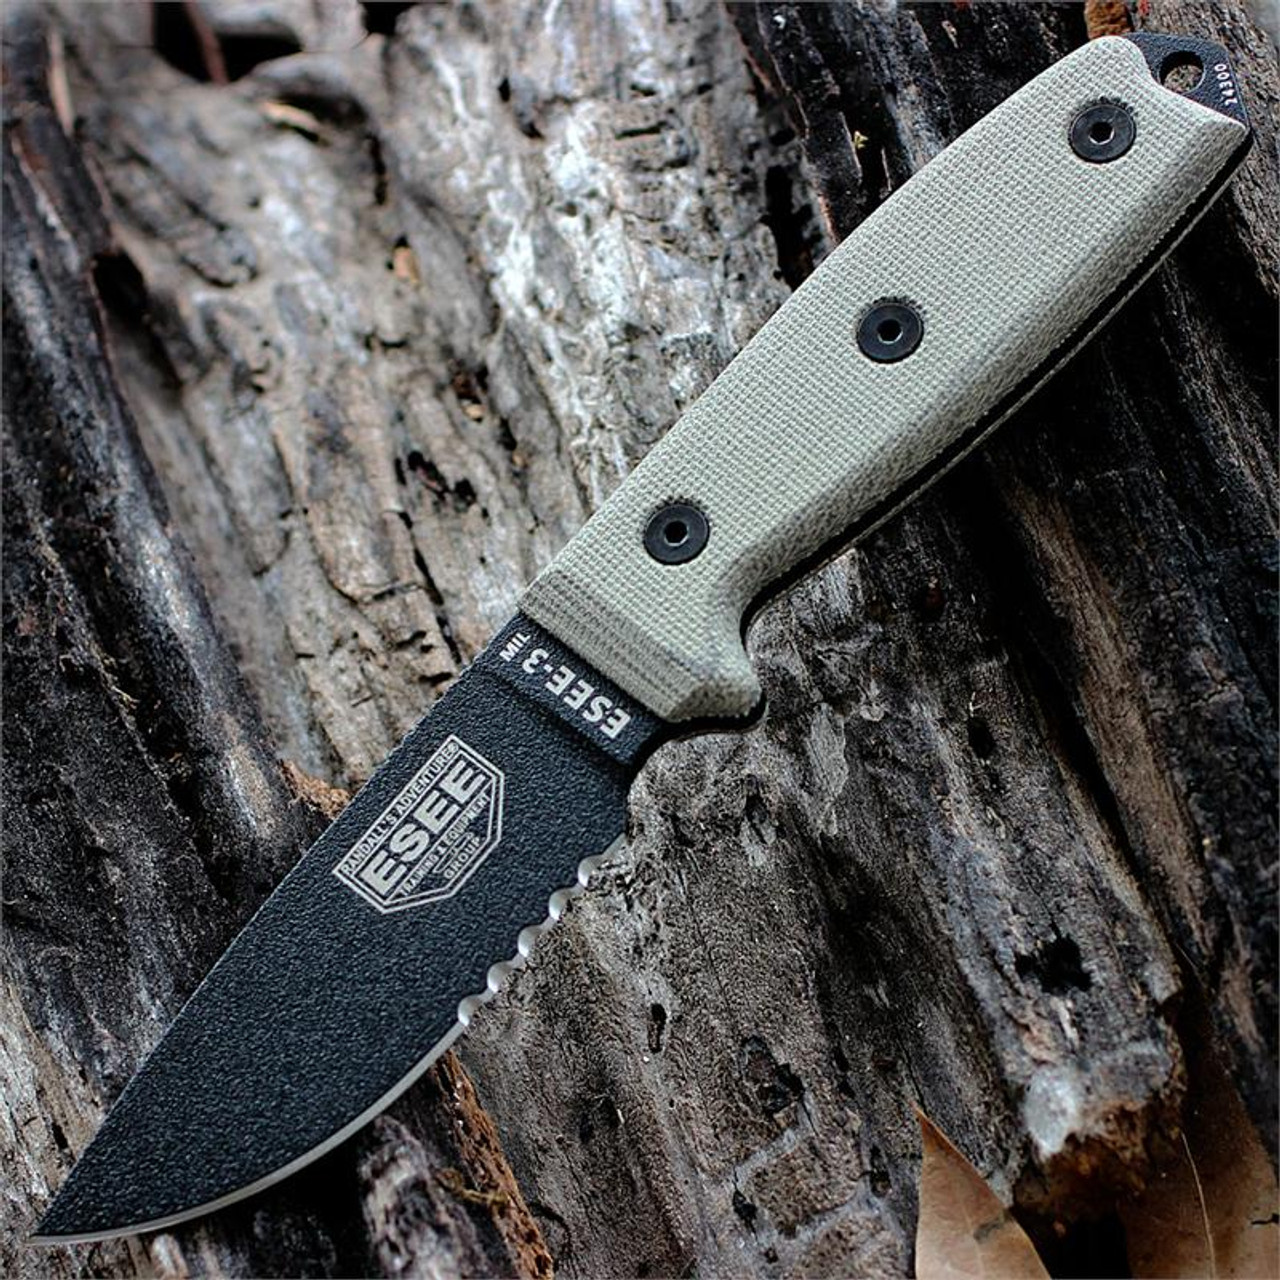 ESEE-3MIL Fixed Blade Knife (ESEE-3MIL-S)- 3.88" Black 1095 Partially Serrated Drop Point Blade, Tan Micarta Handle | No Box